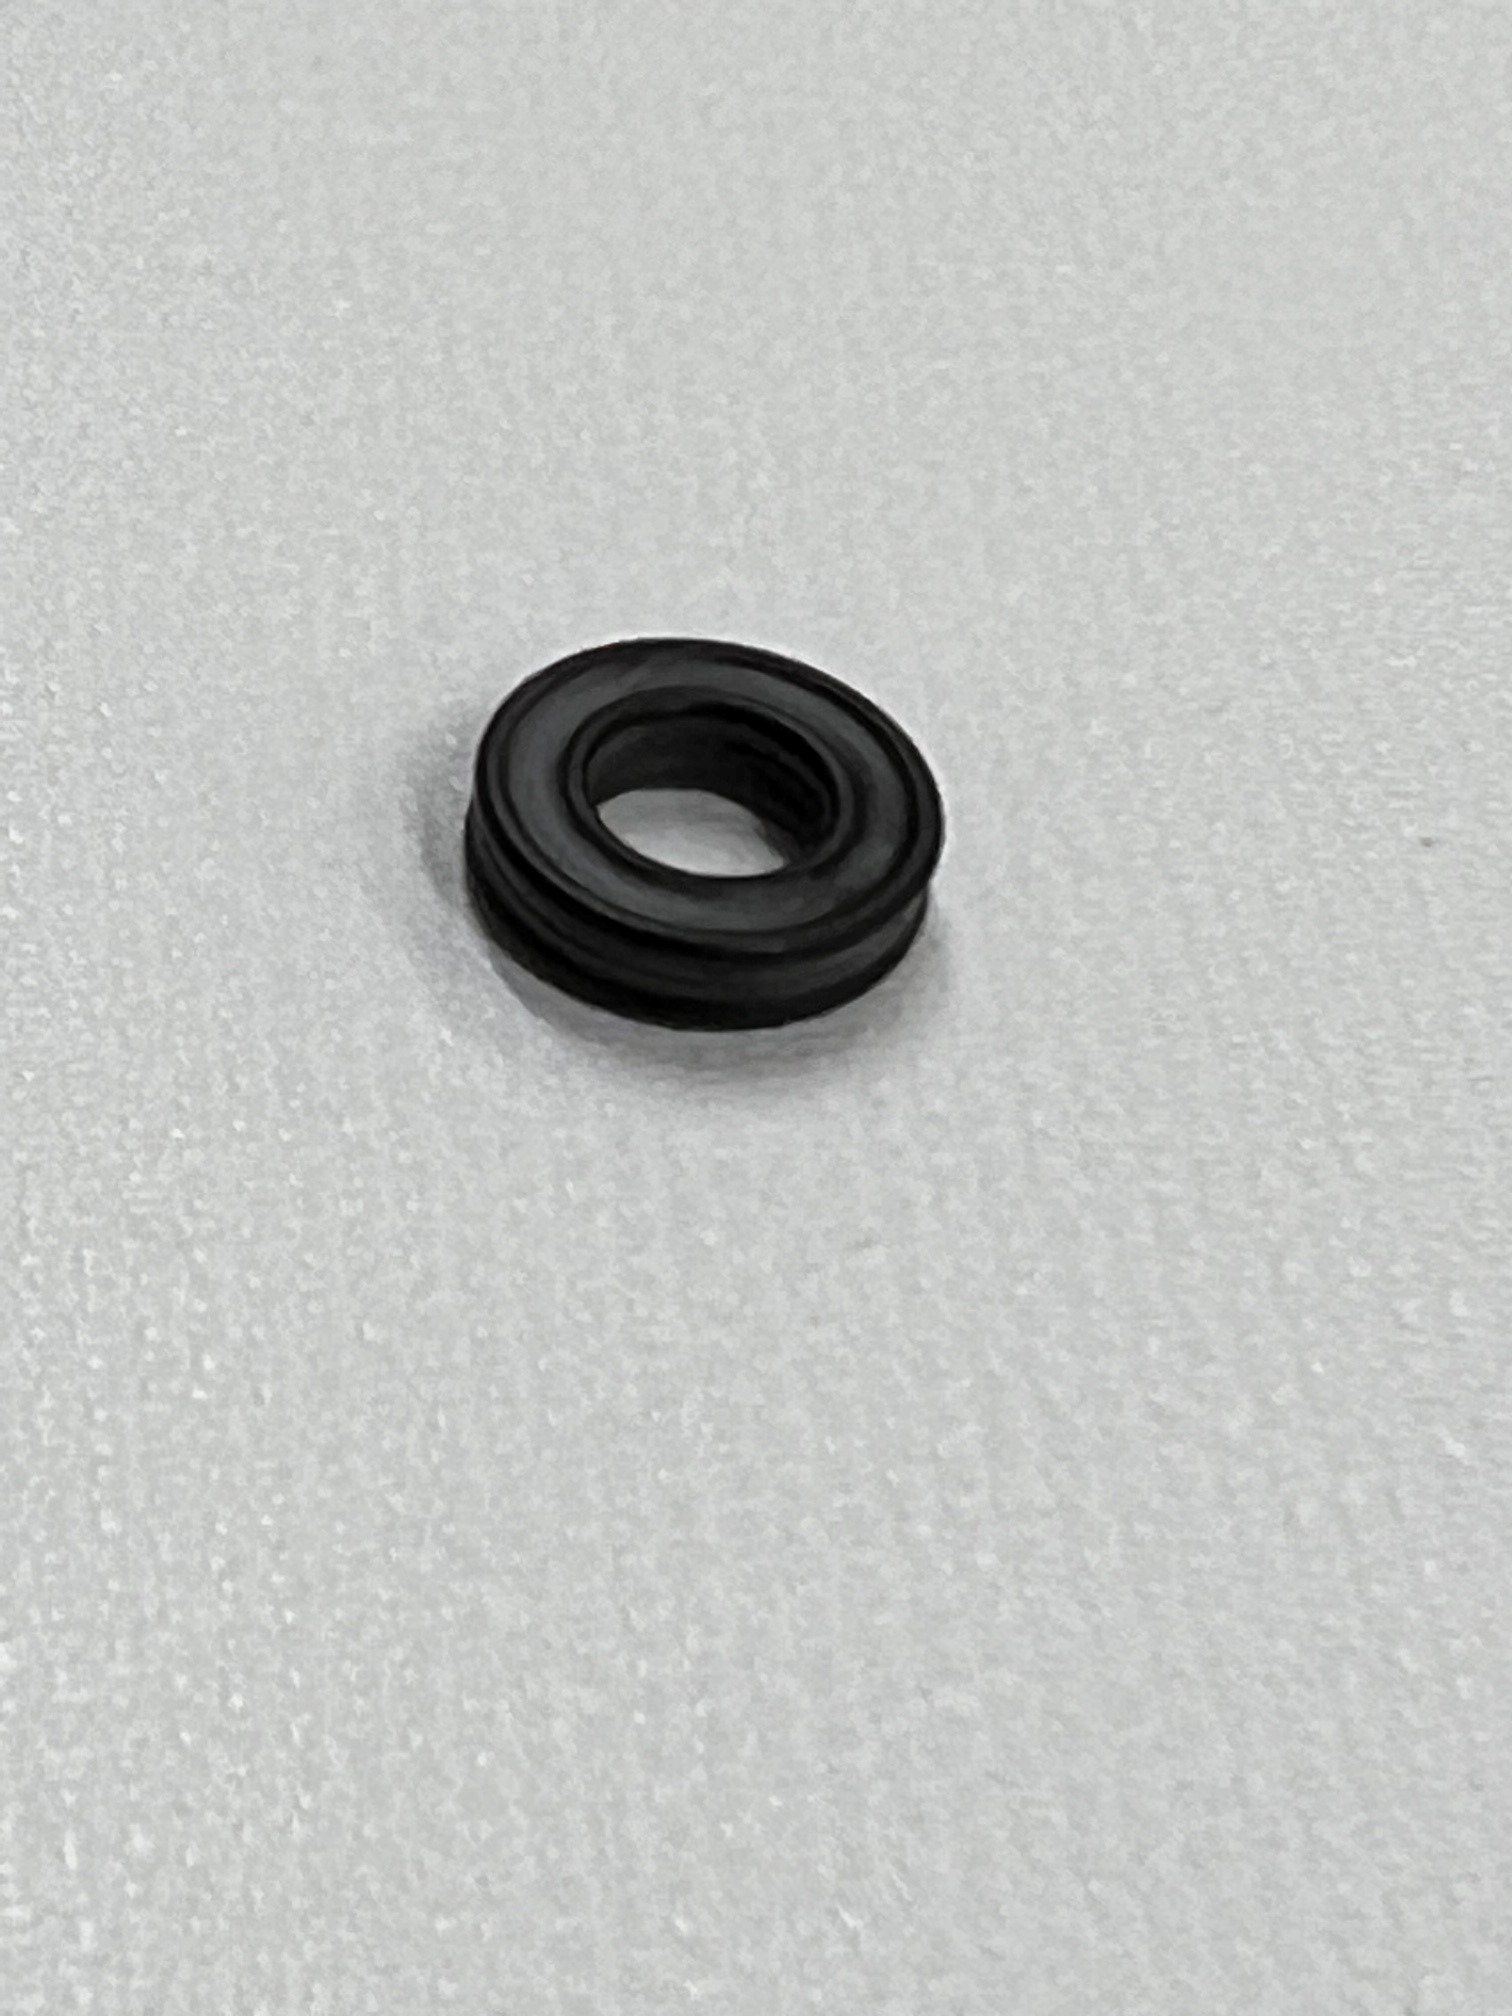 ZF Clutch Hose Seal For Stock Master And Slave Units